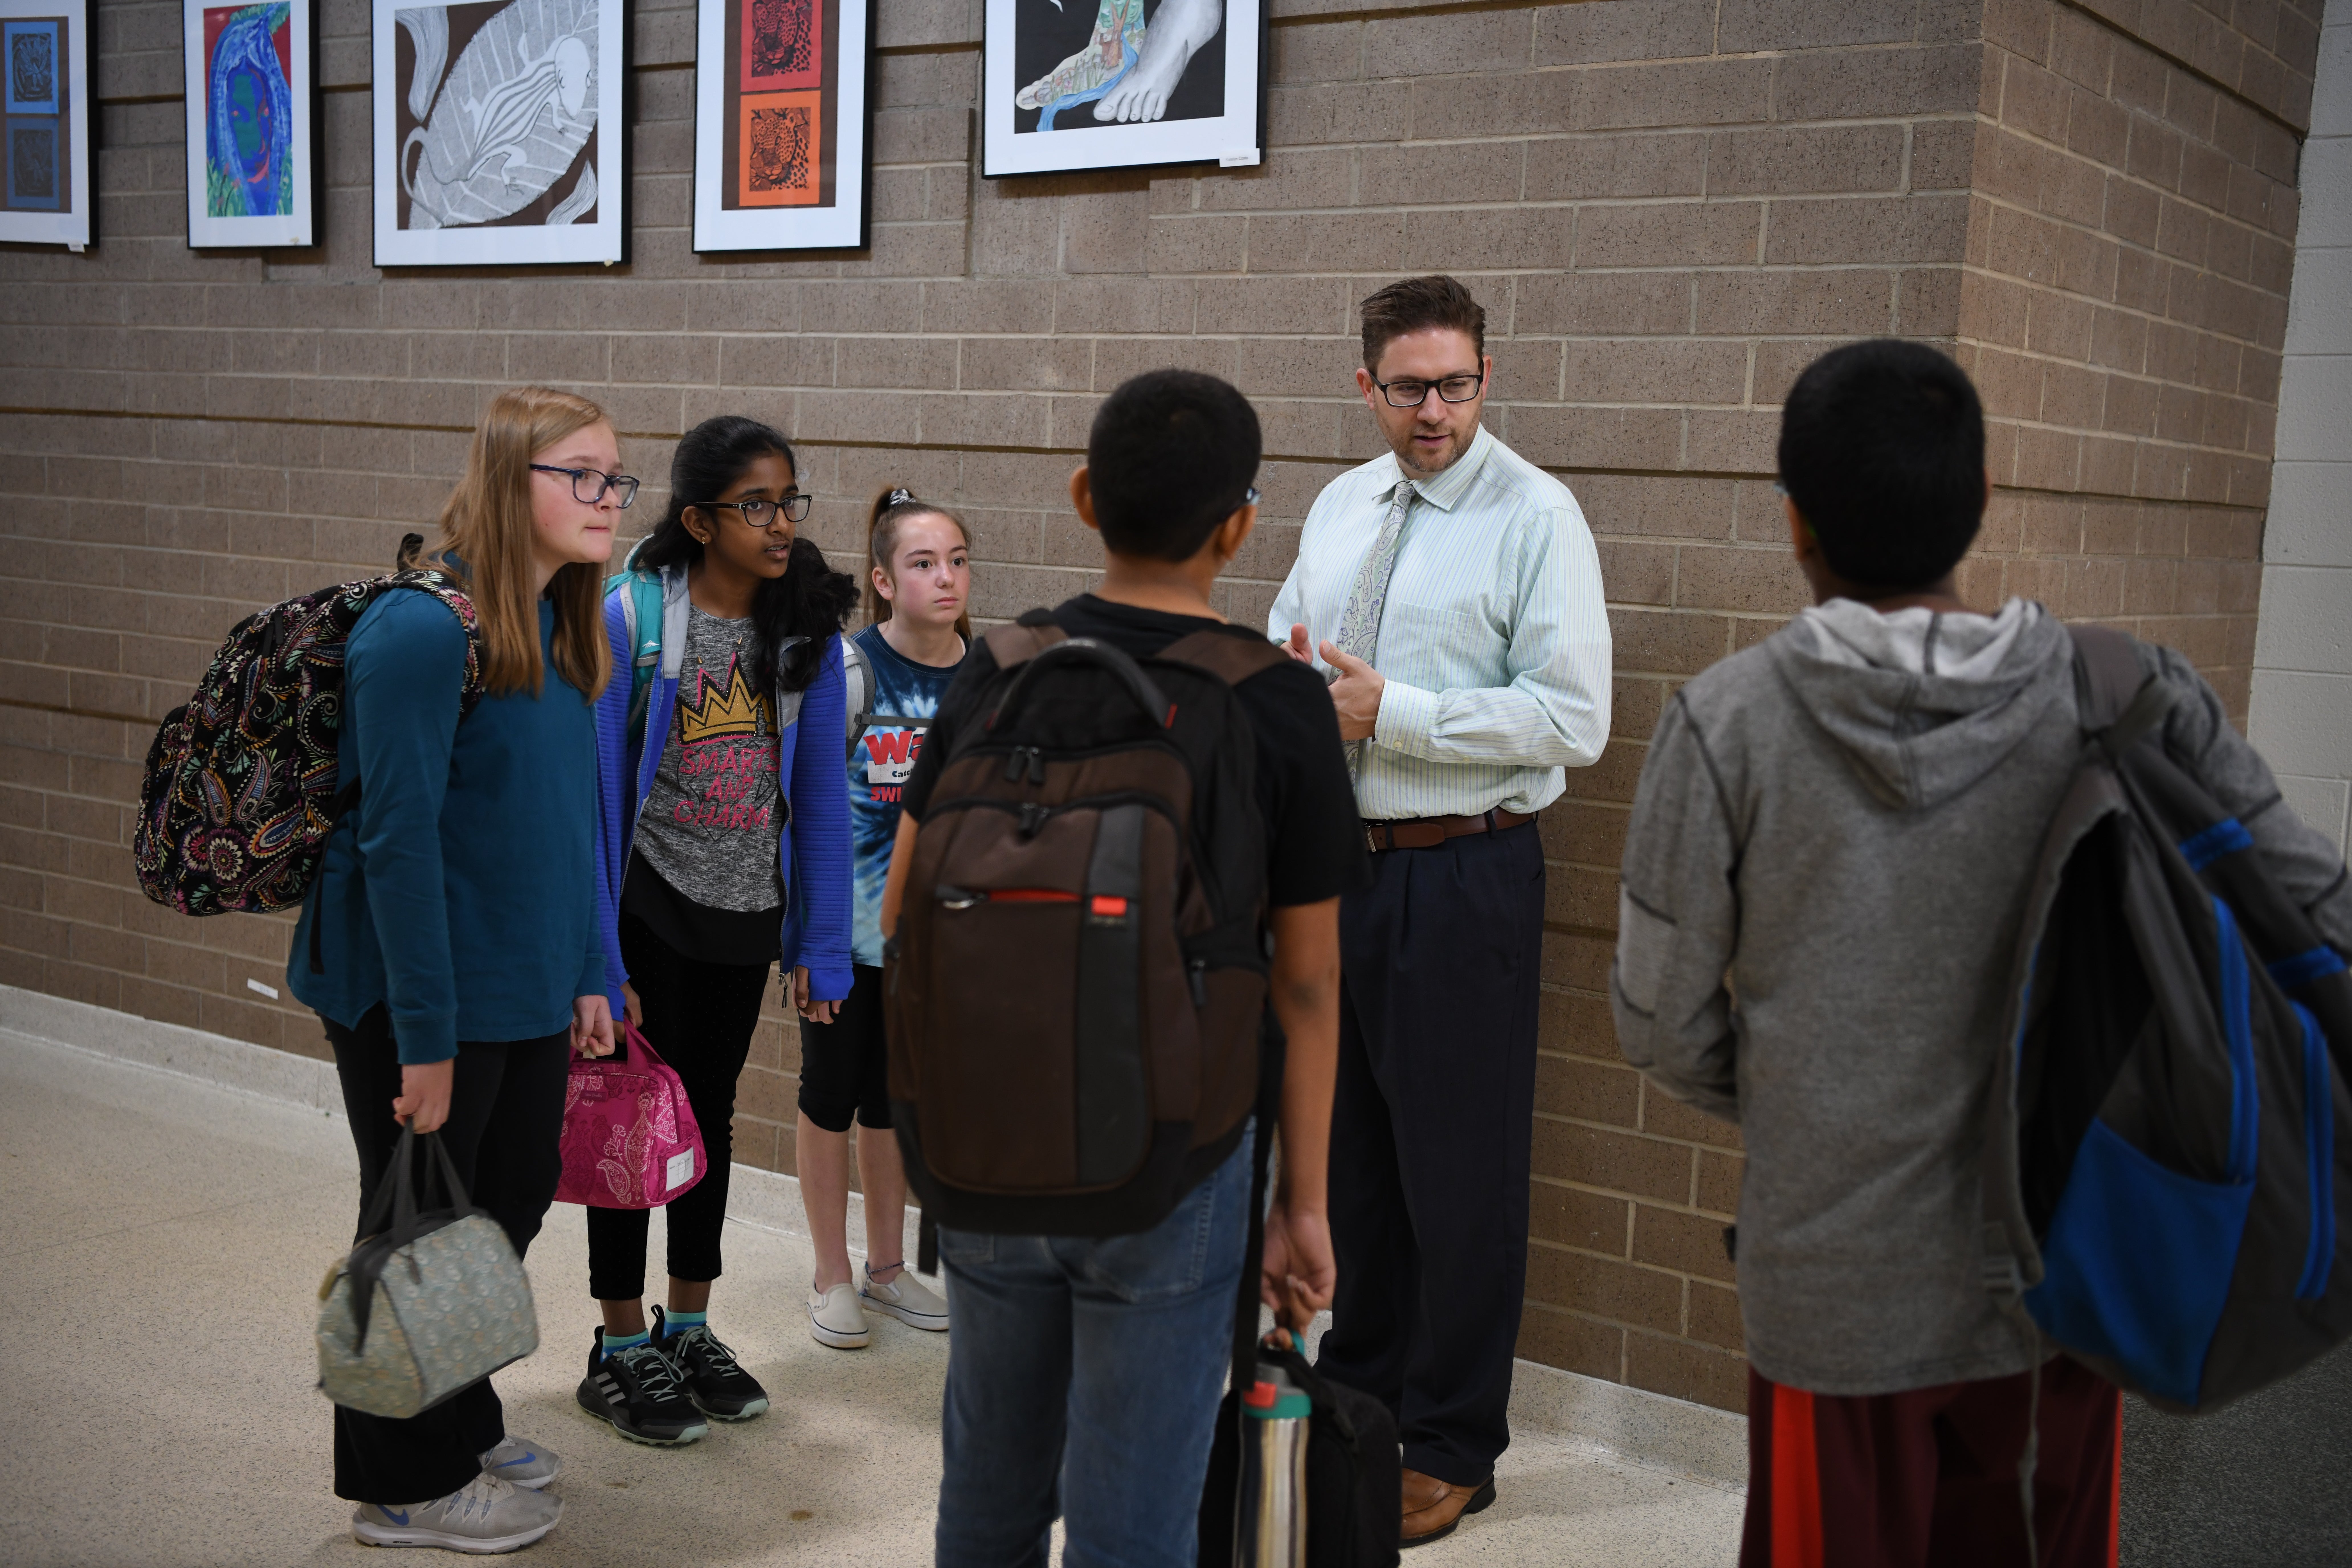 A school principal chats with students in the hallway between classes.